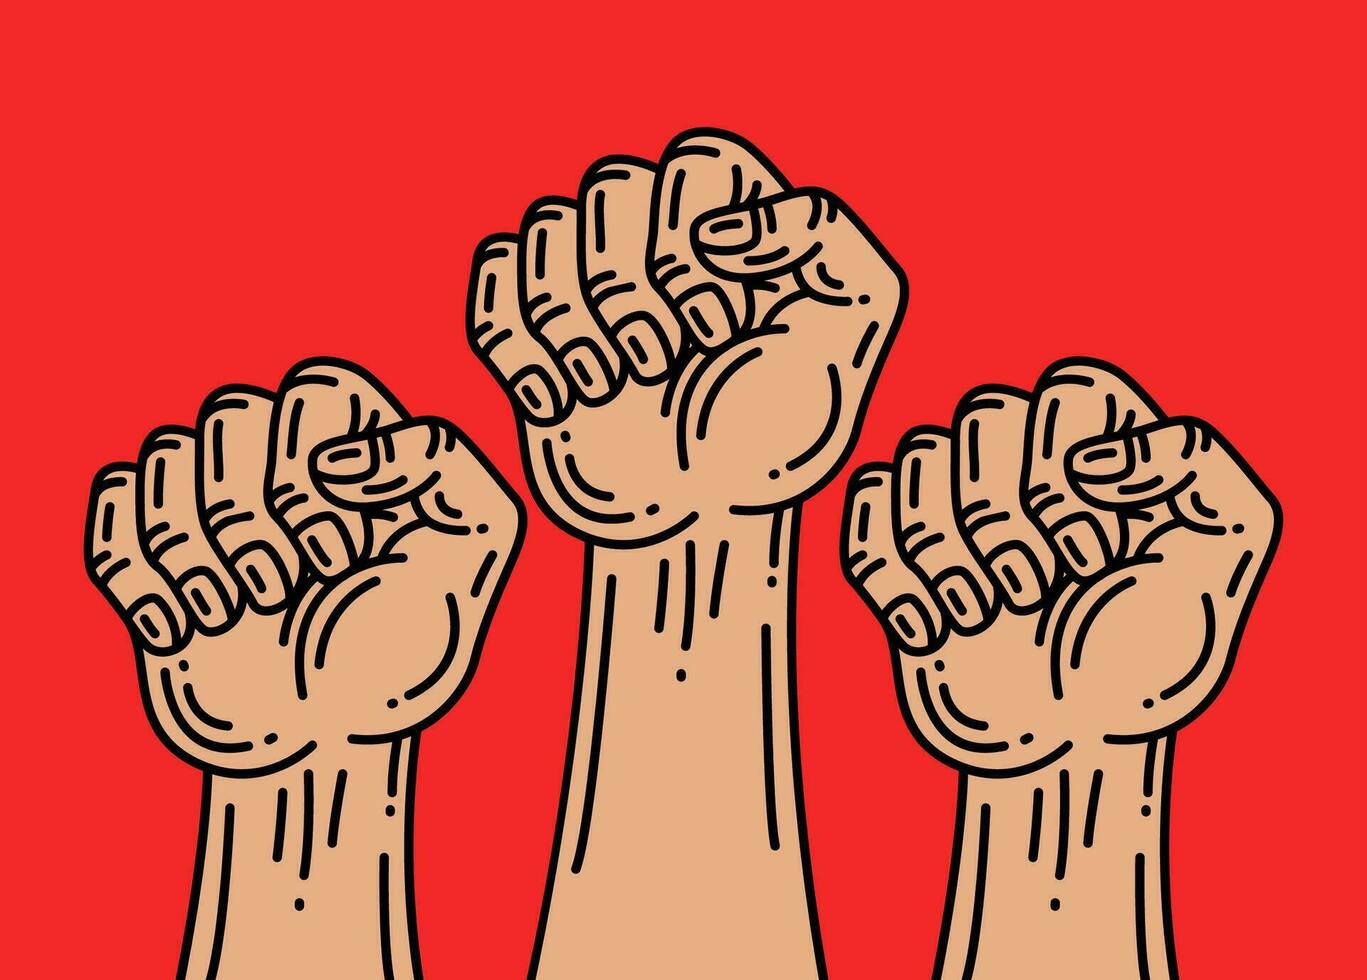 Different skin color activist fists and end racism slogan. abstract anti racist, strike or other protest label. vector